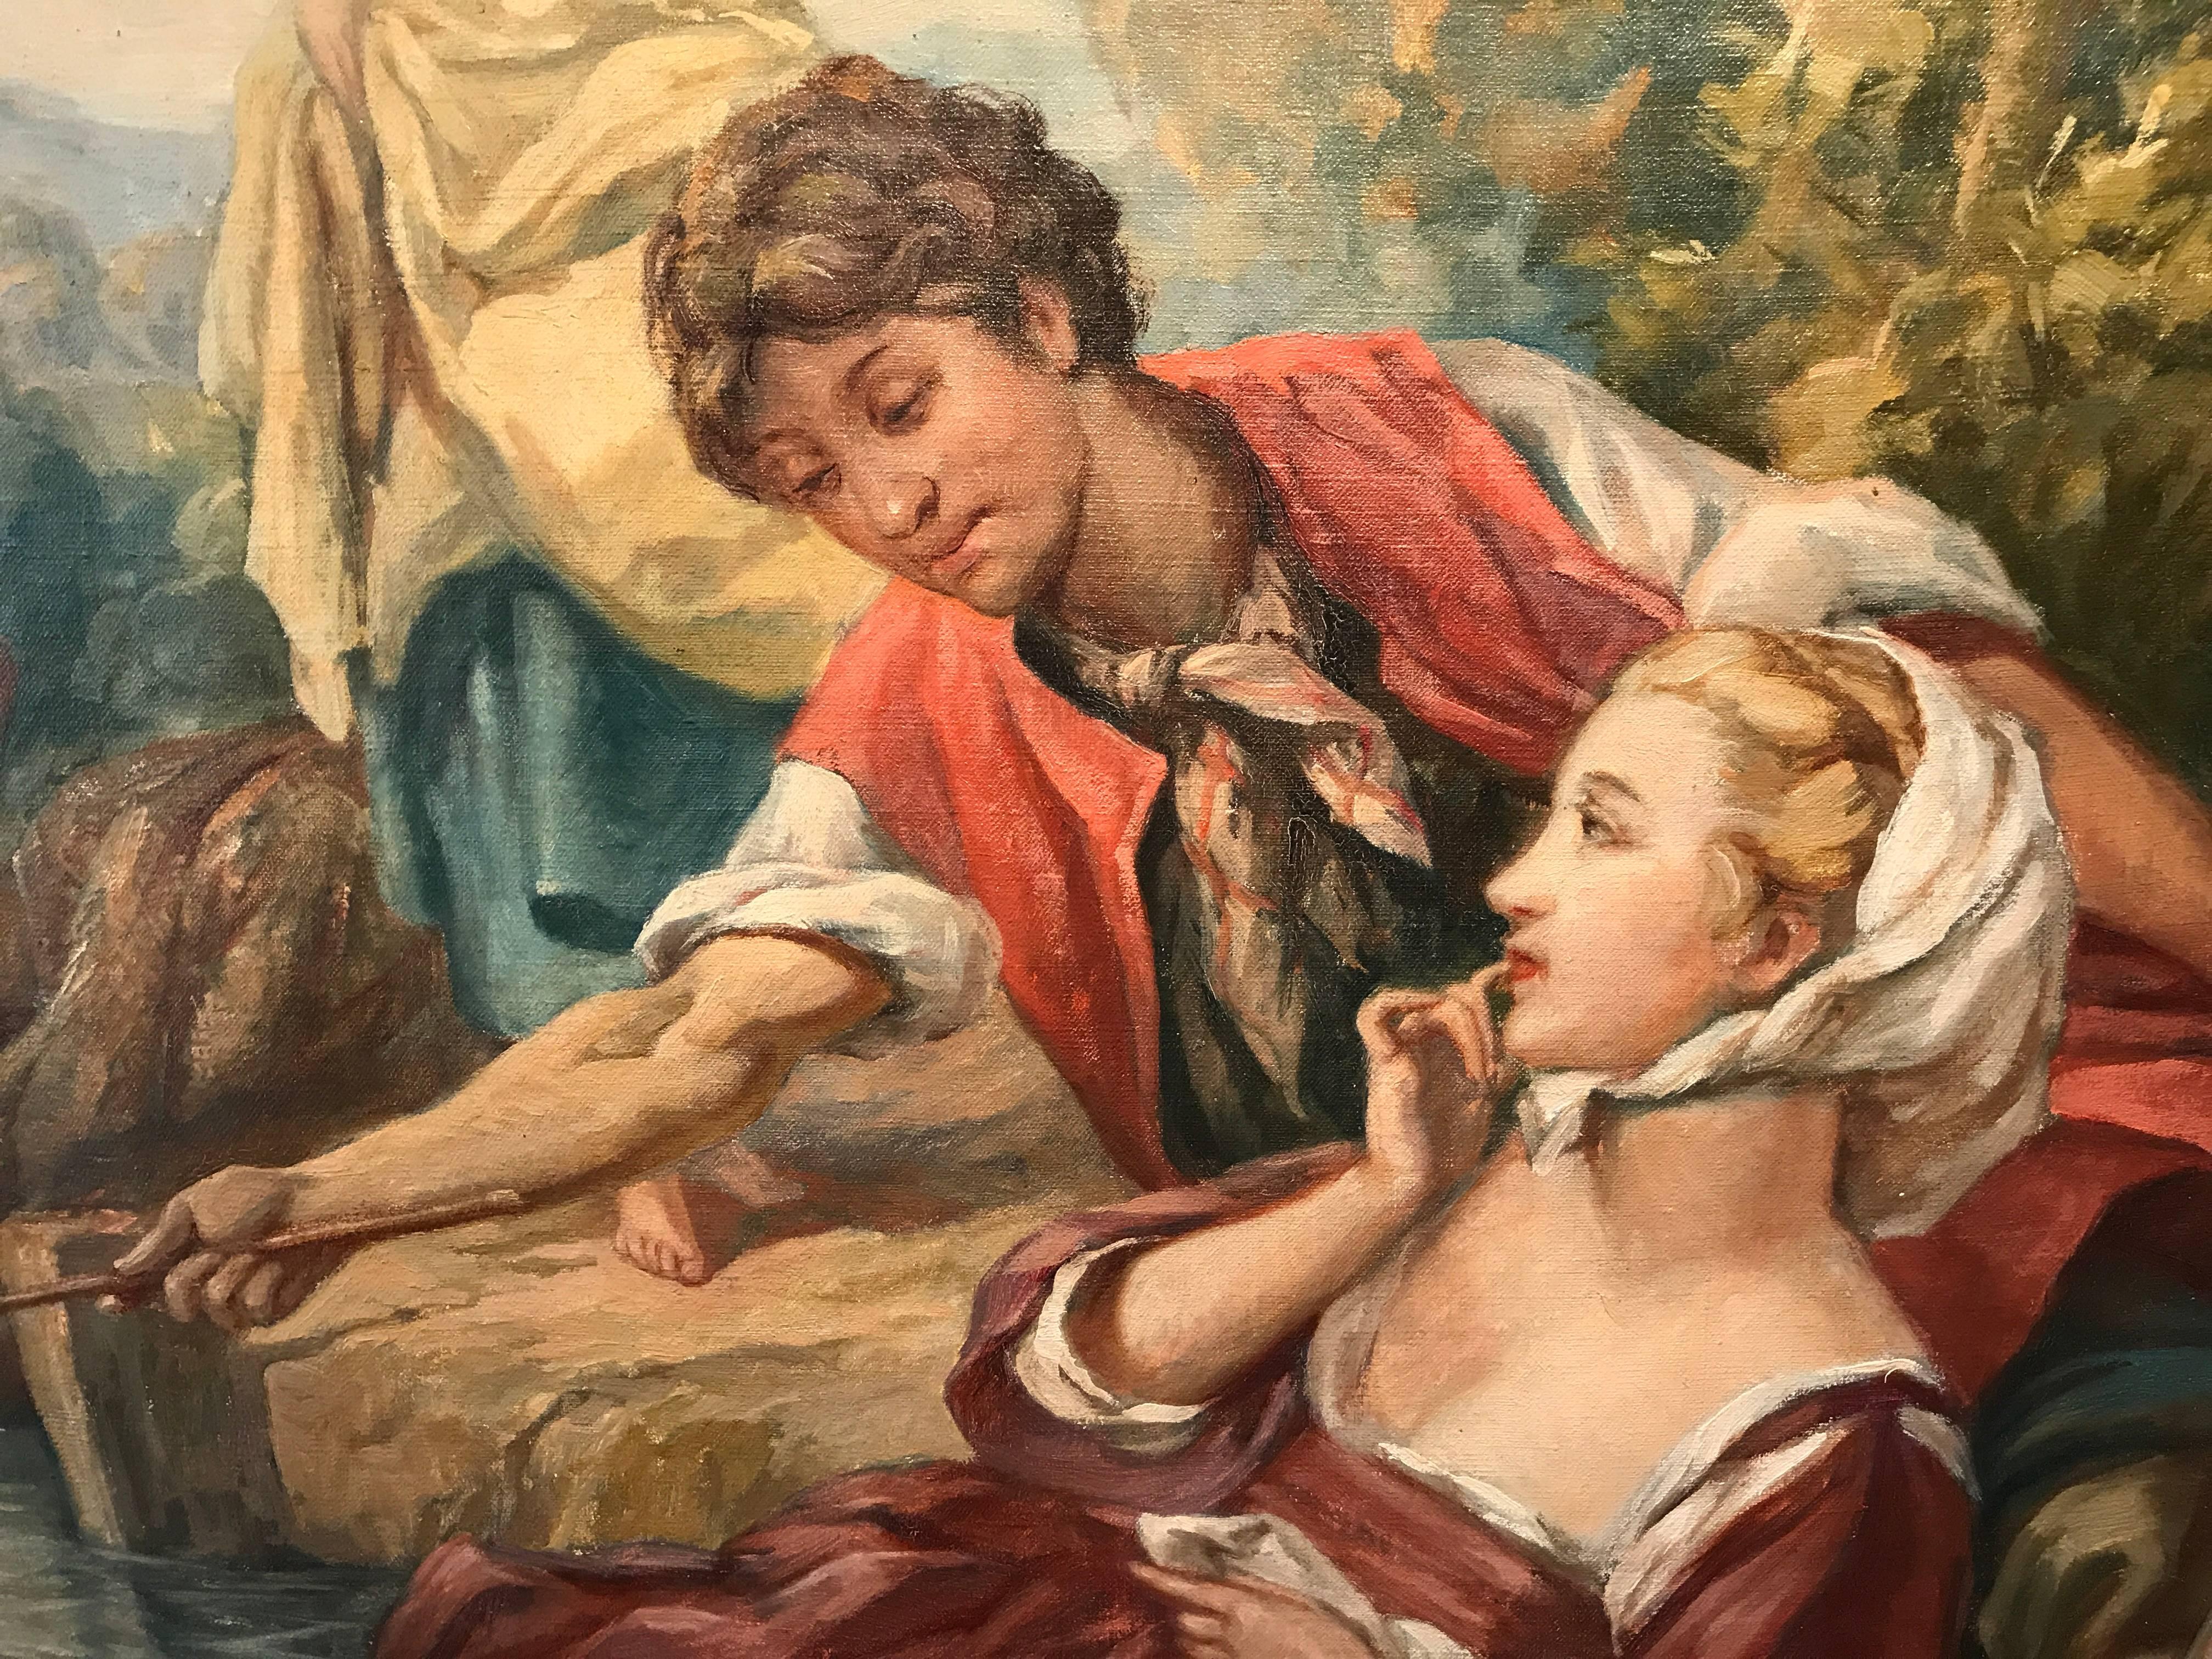 Stunning quality large oval oil painting depicting these young figures in a woodland setting. The young maid overlooks with a hint of jealously as the maiden catches the eye of the young labourer. The painting is typical of the French Rococo style